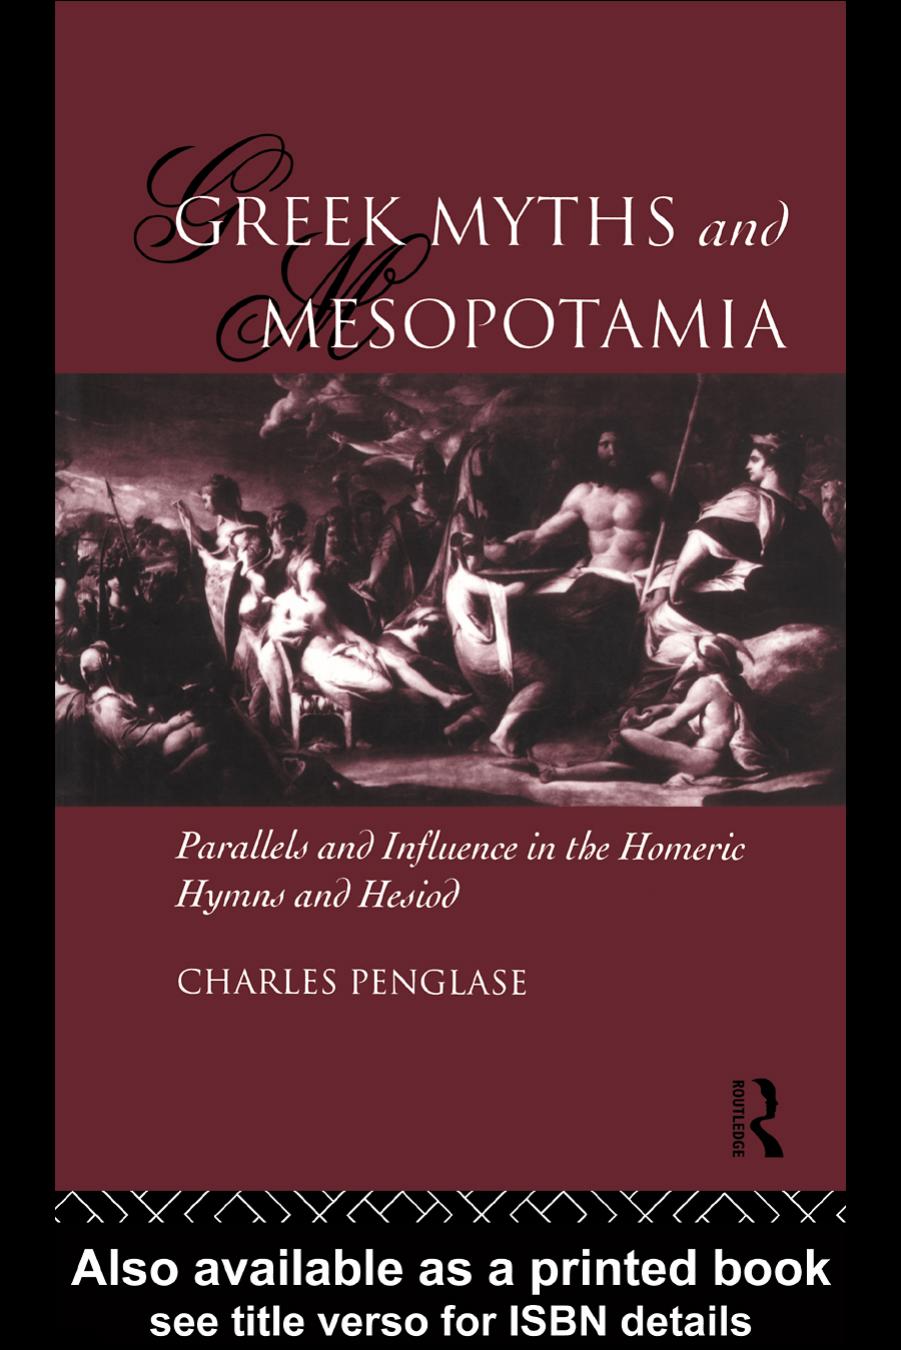 Greek Myths and Mesopotamia: Parallels and Influence in the Homeric Hymns and Hesiod by Charles Penglase